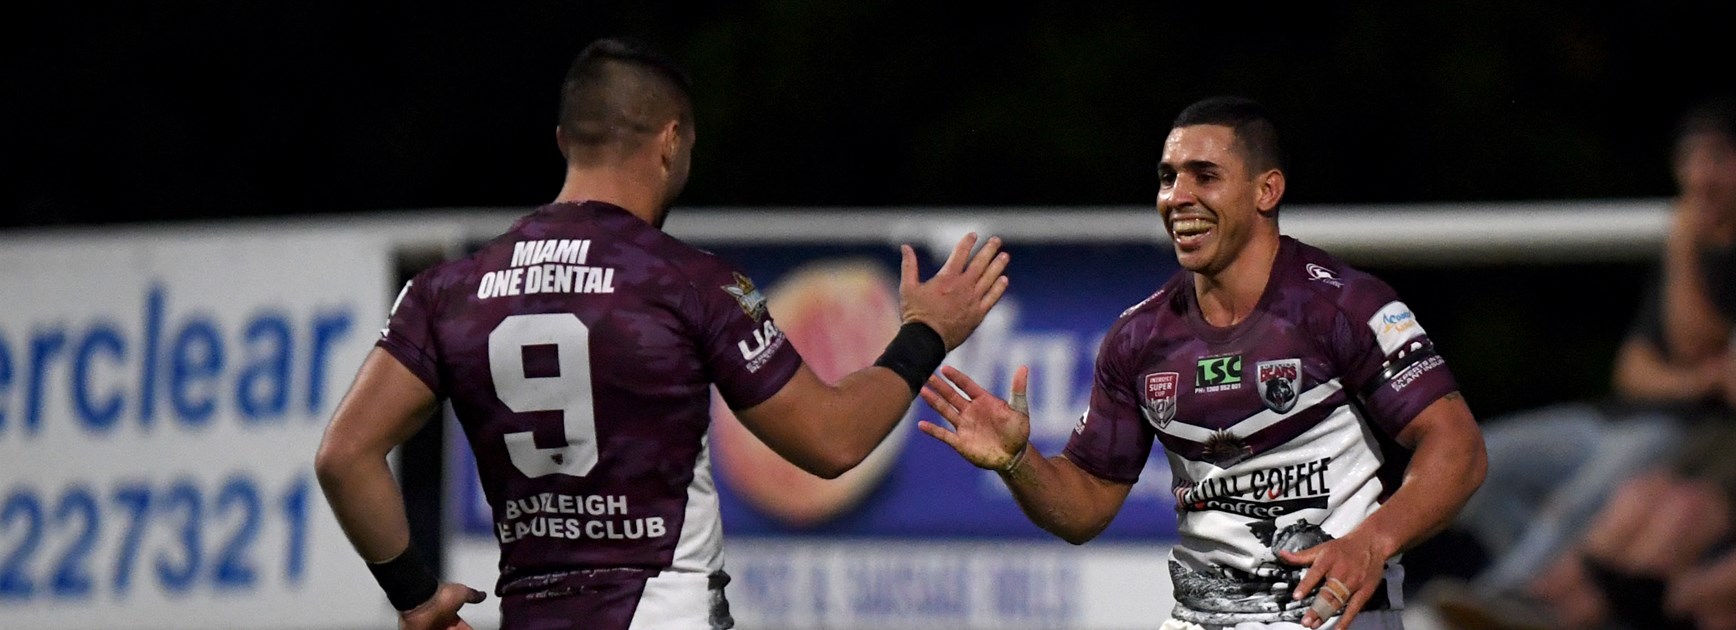 2019 Year in Review: Burleigh Bears